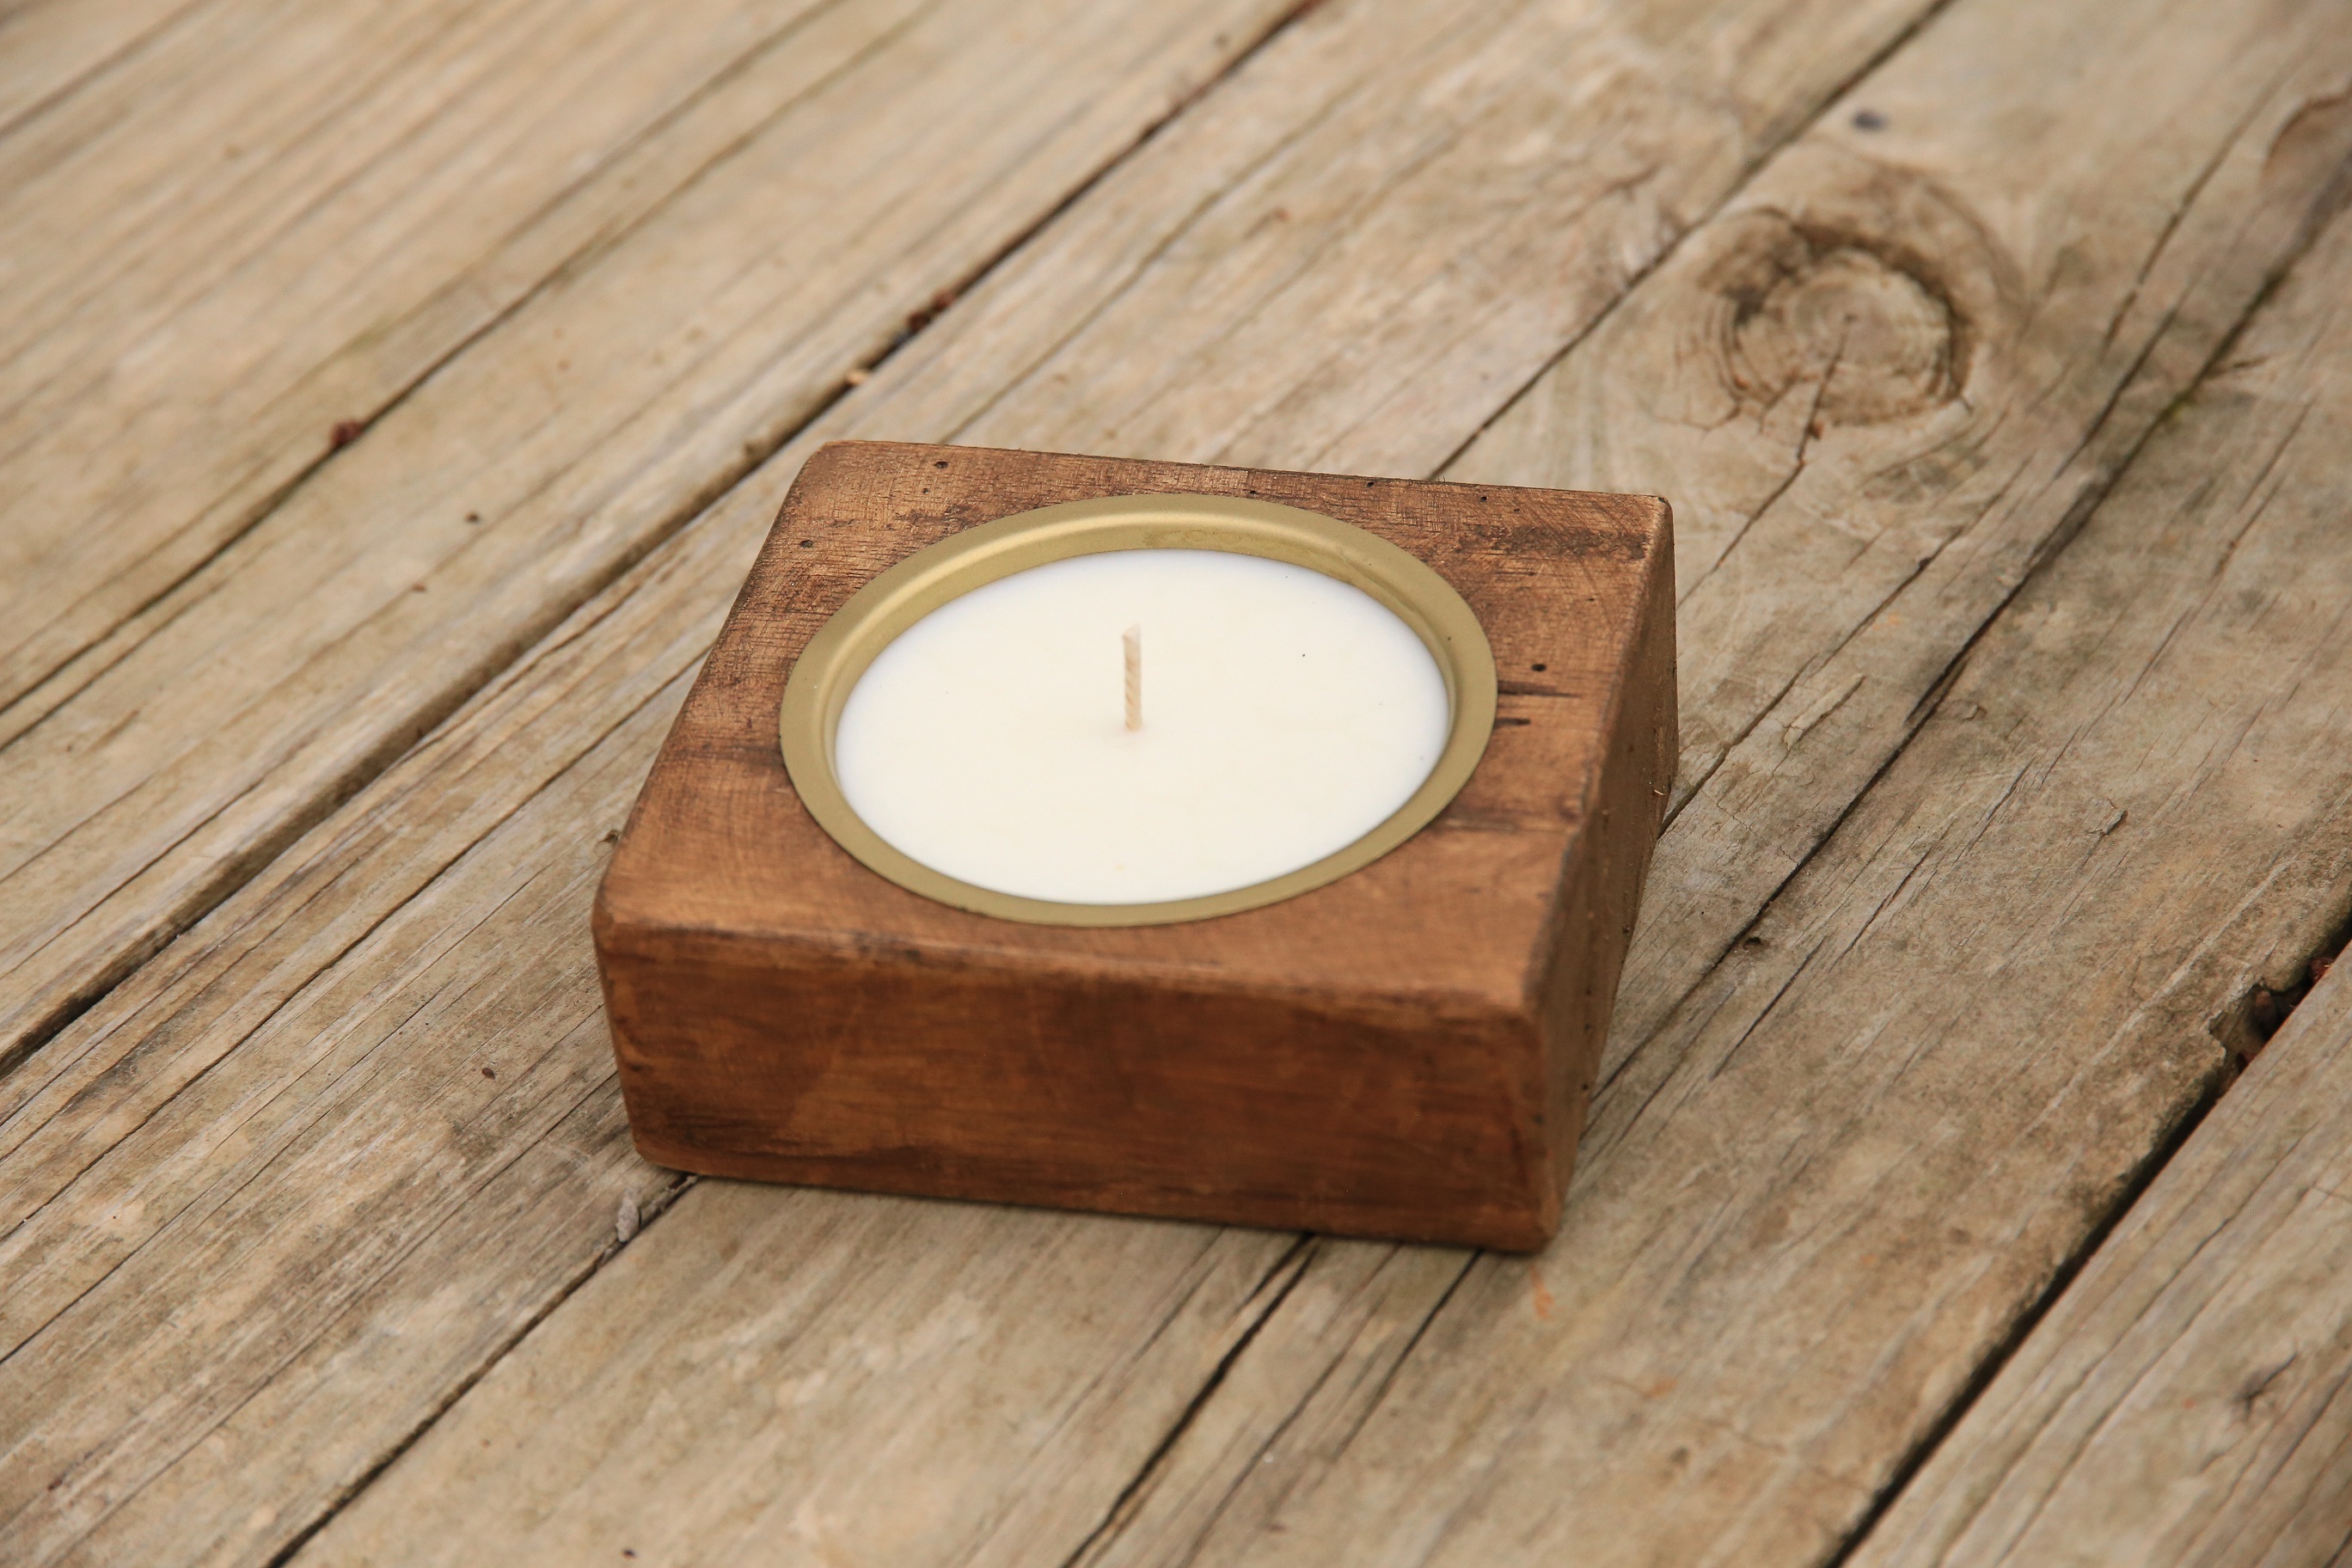 1 Hole Cheese mold Candle